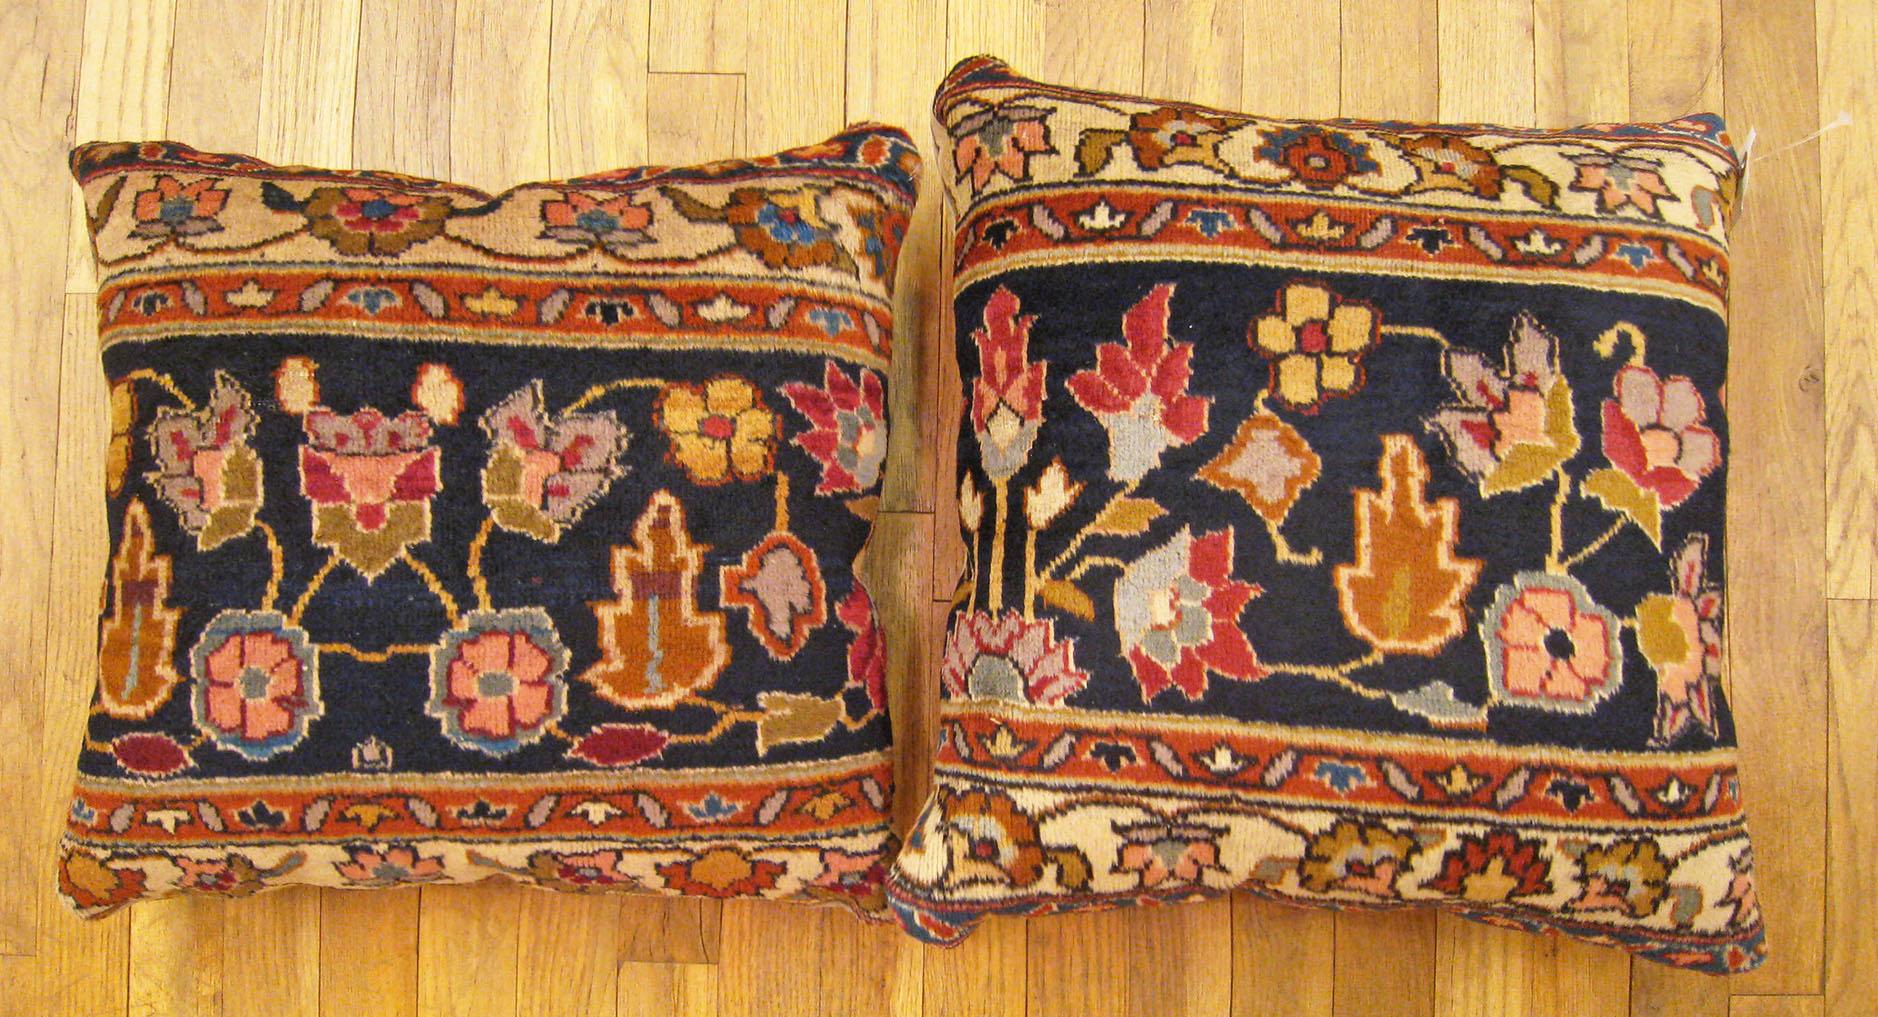 A pair of antique indian agra rug pillows ; size 1'5” x 1'5” and 1'6” x 1'6”

An antique decorative pillows with floral elements allover a blue central field, size  1'5” x 1'5” and 1'6” x 1'6” each. This lovely decorative pillow features an antique